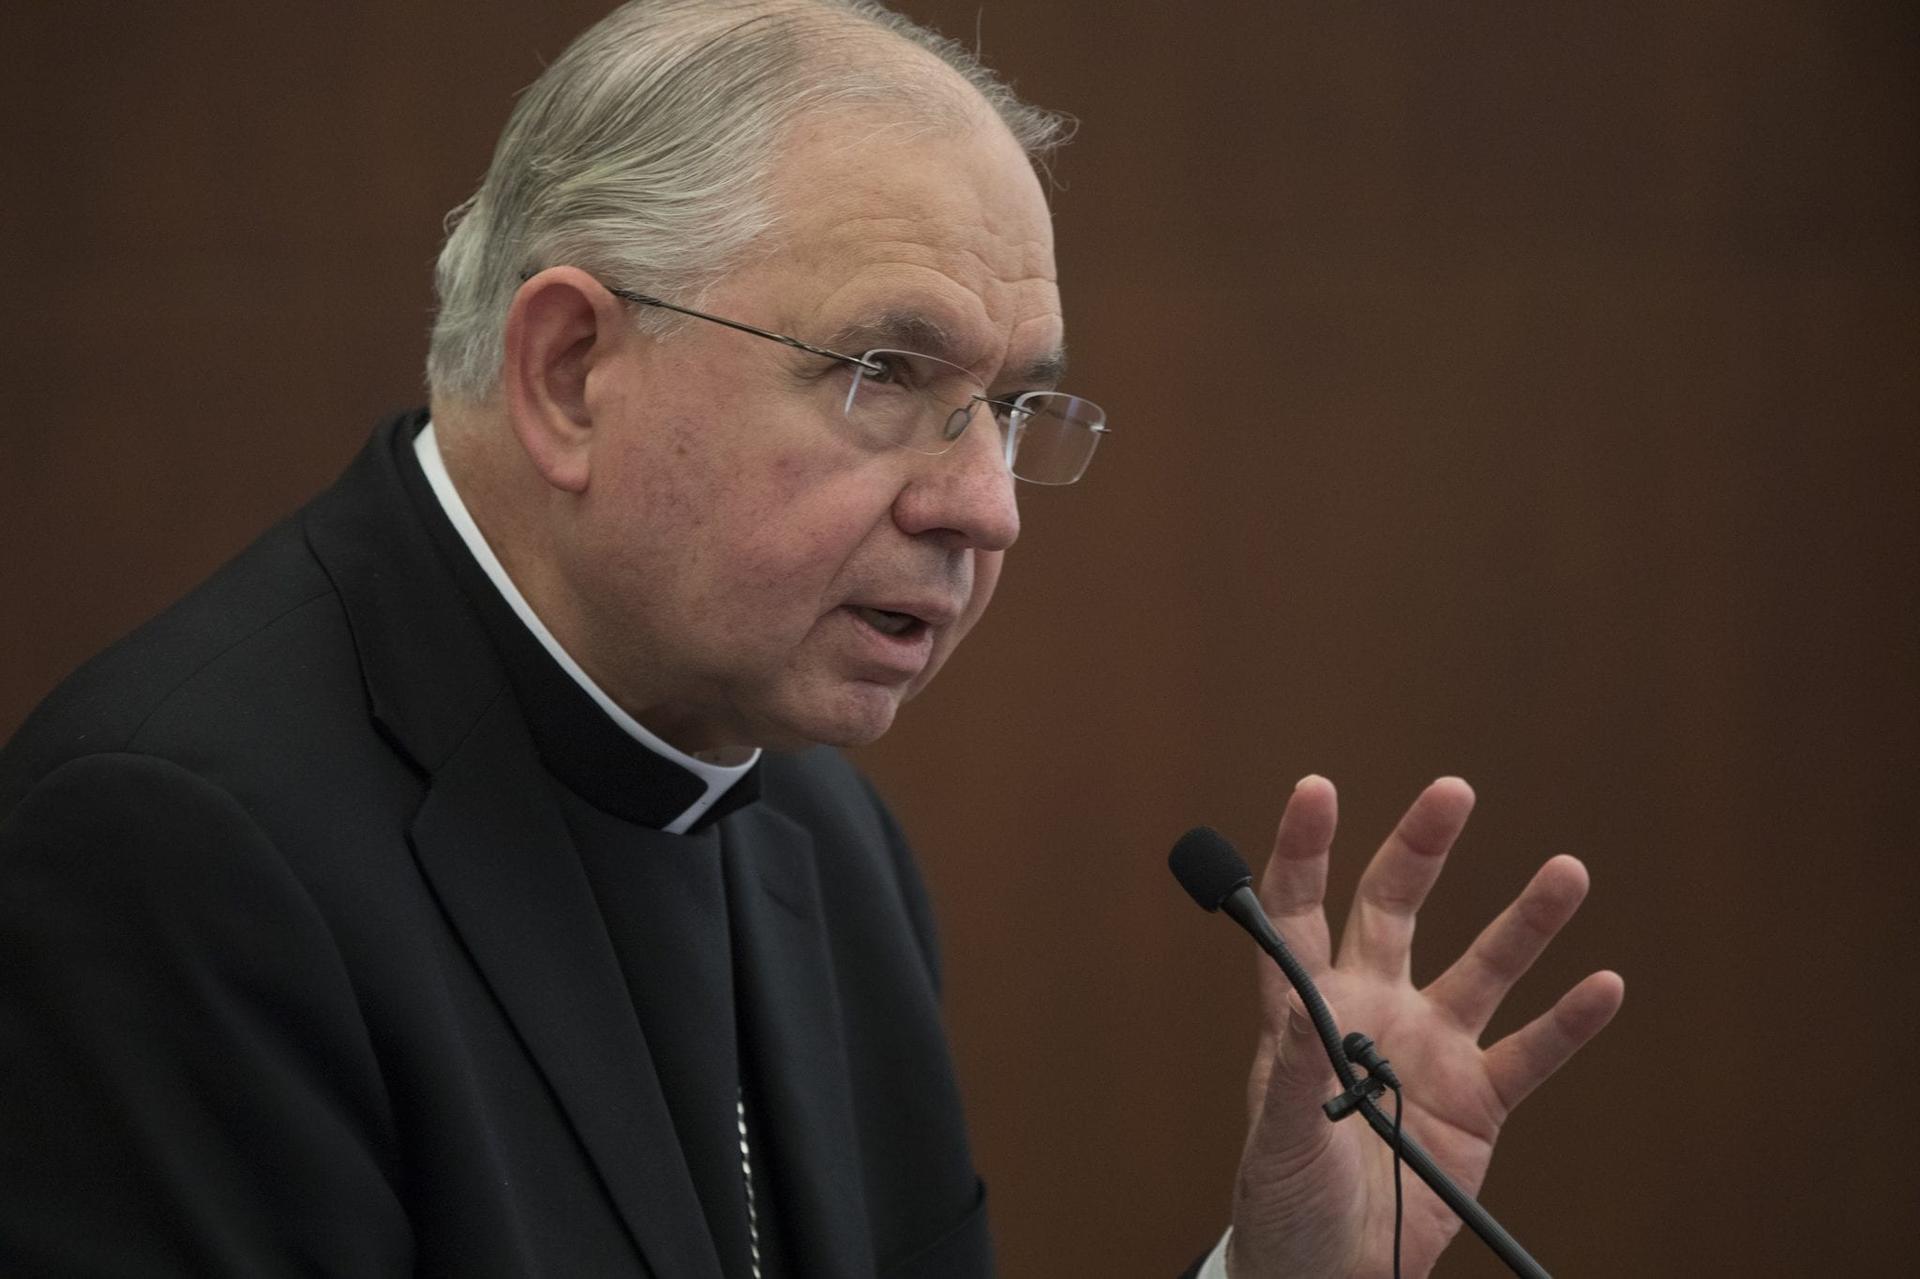 ‘Violence in the name of God is blasphemy,’ USCCB president says